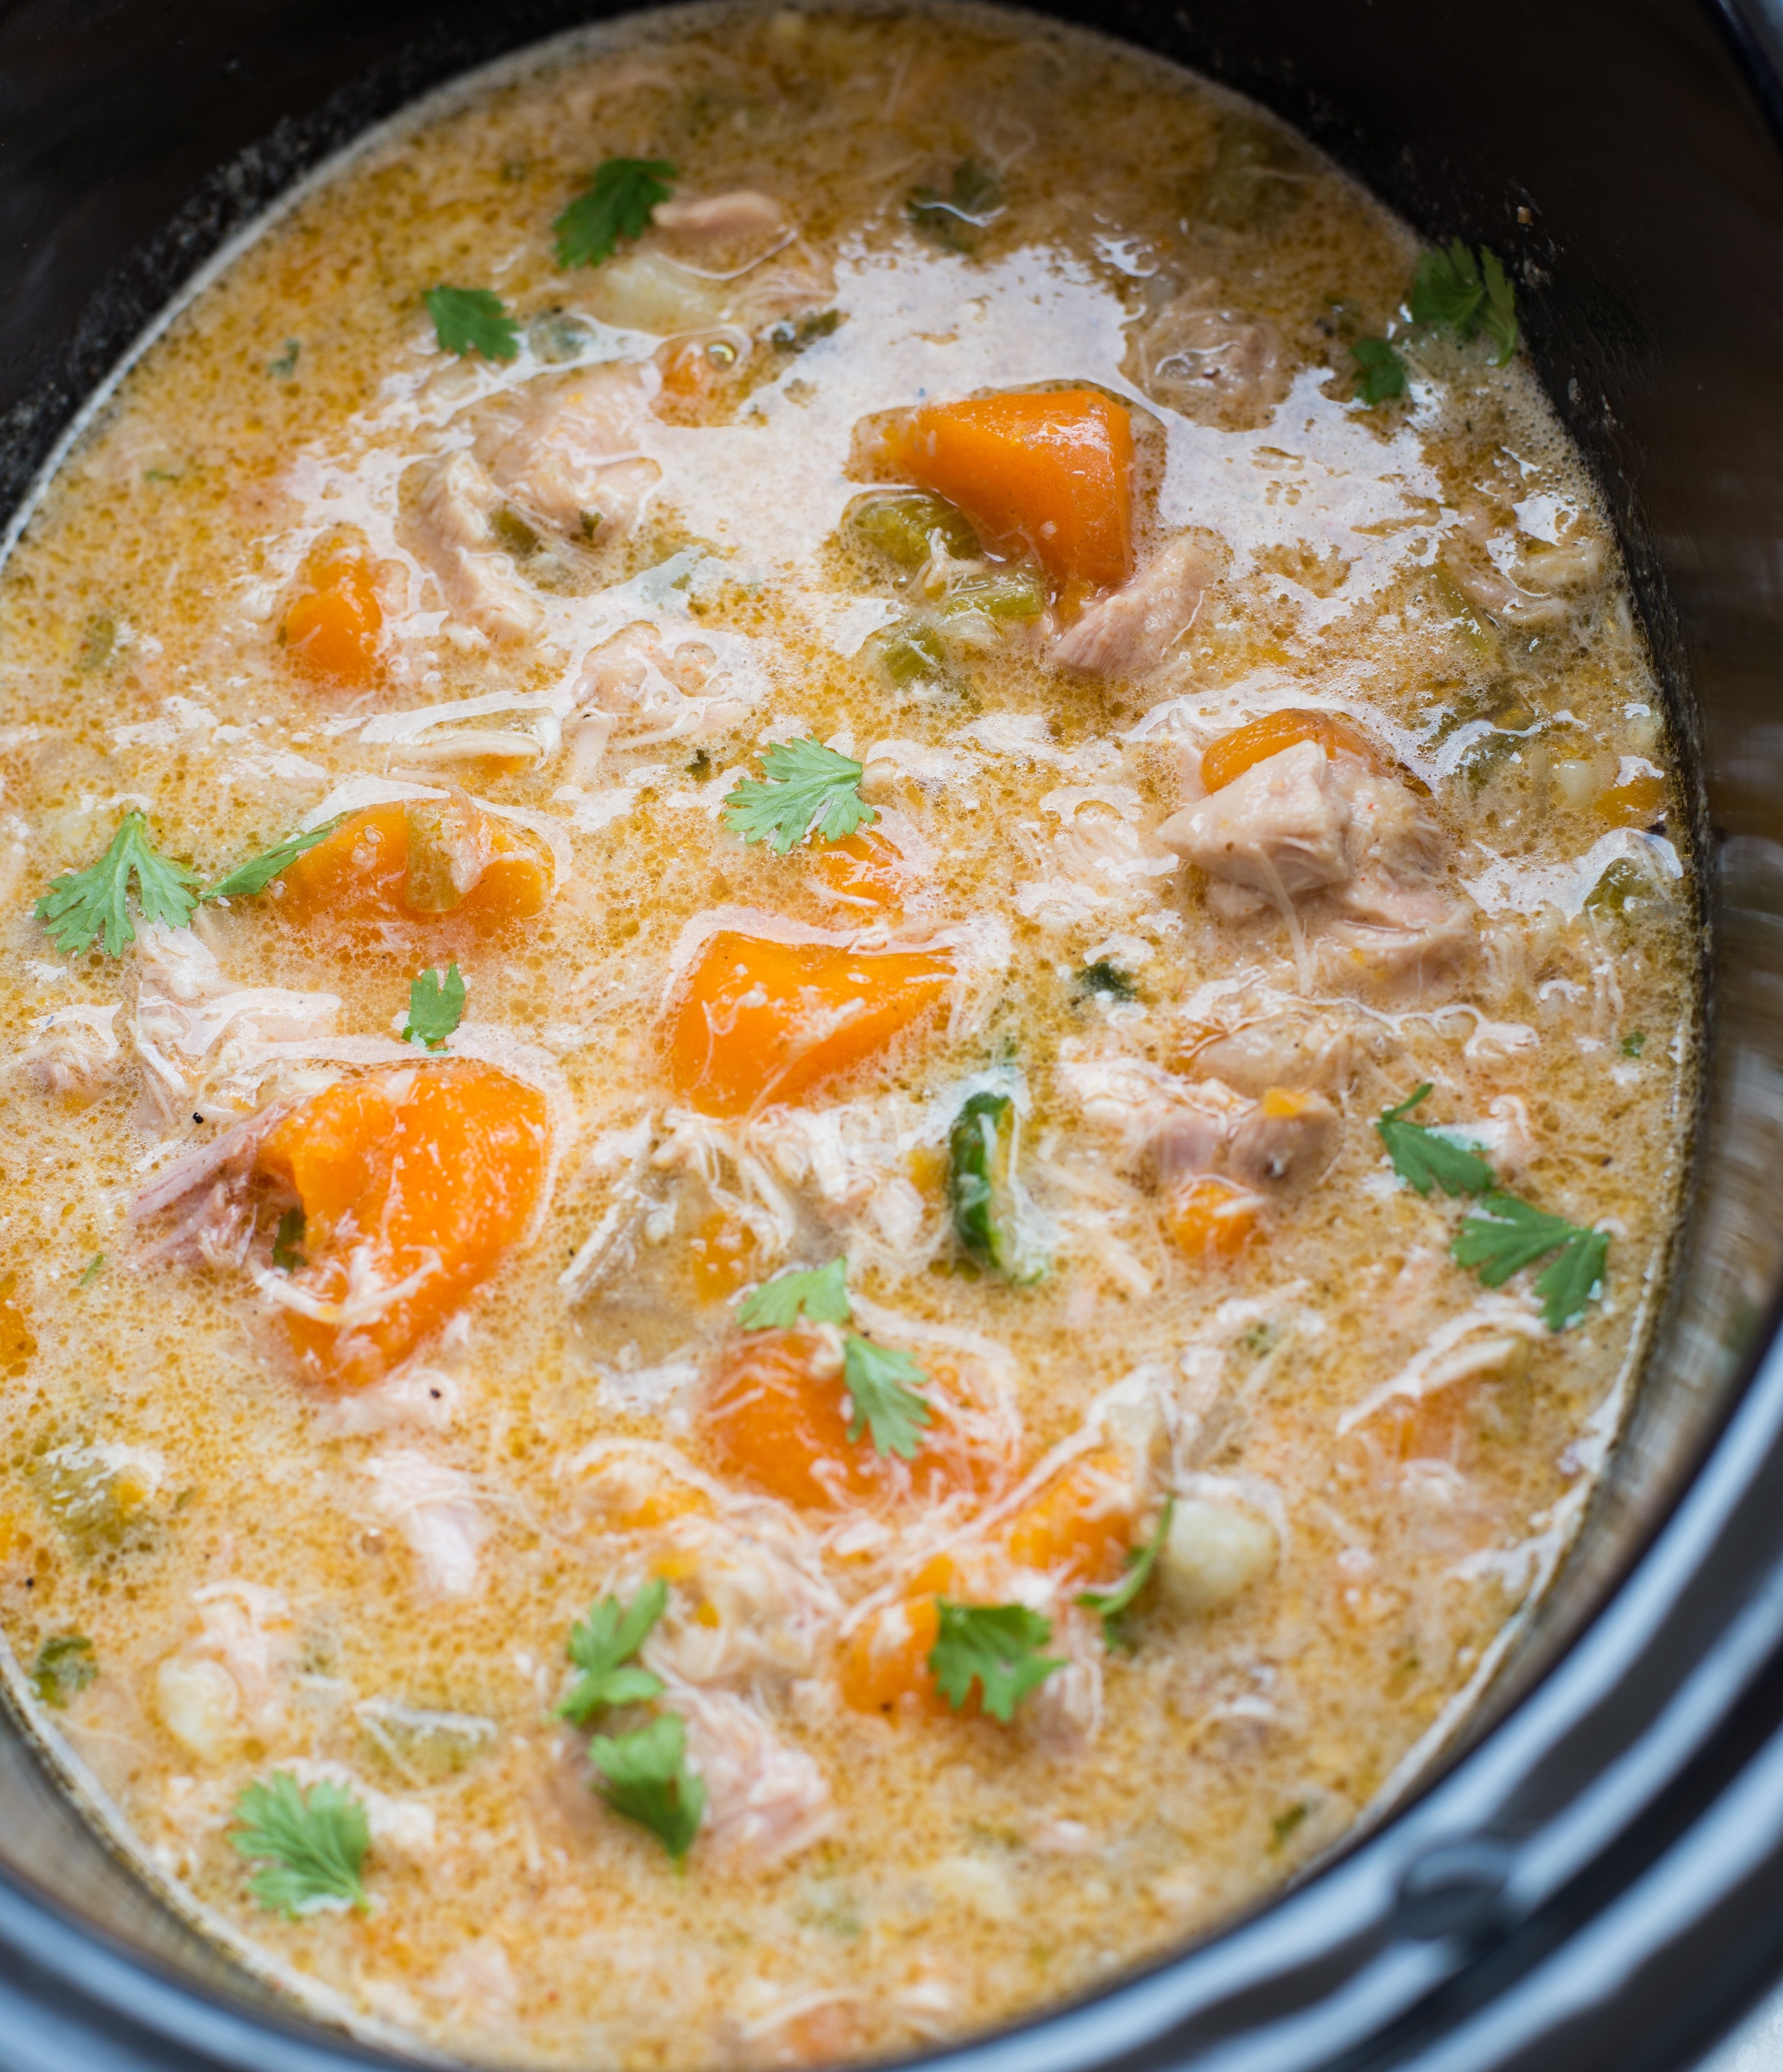 SLOW COOKER CHICKEN STEW - The flavours of kitchen